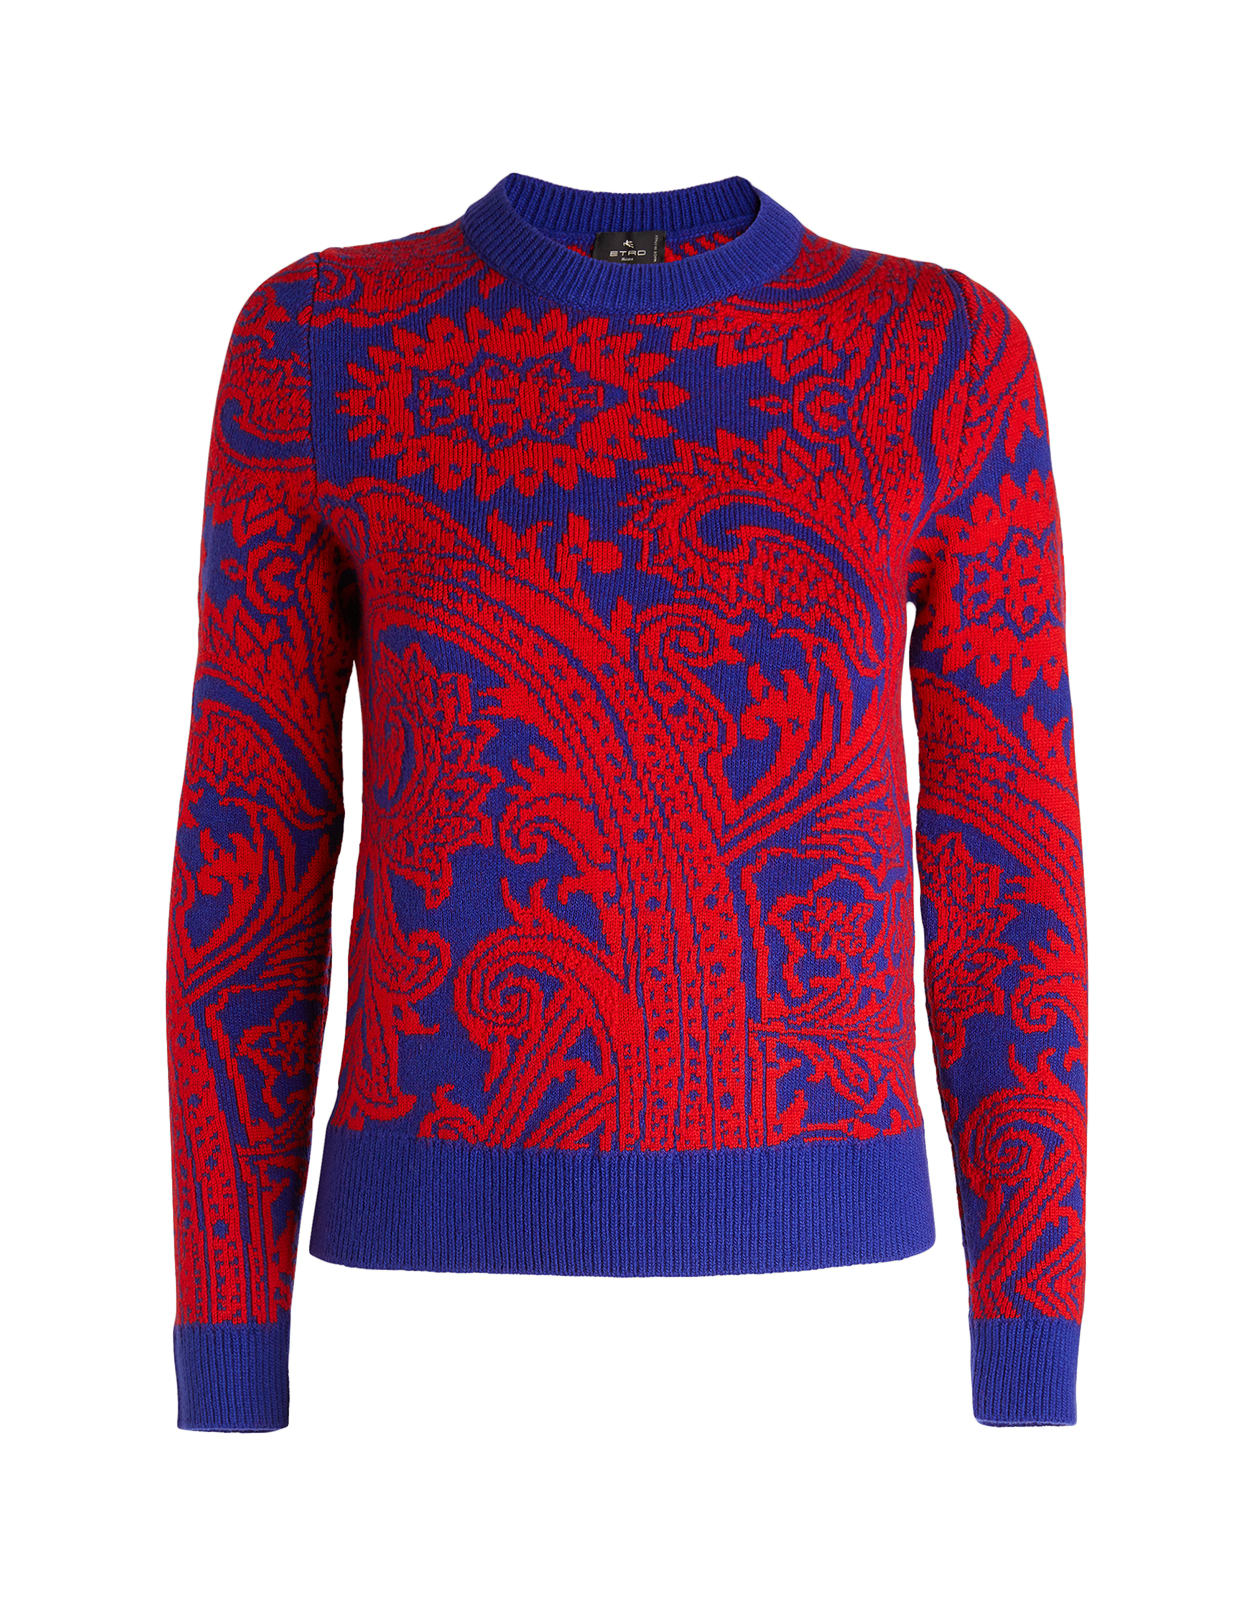 Etro Woman Blue And Red Jacquard Wool Sweater With Paisley Pattern